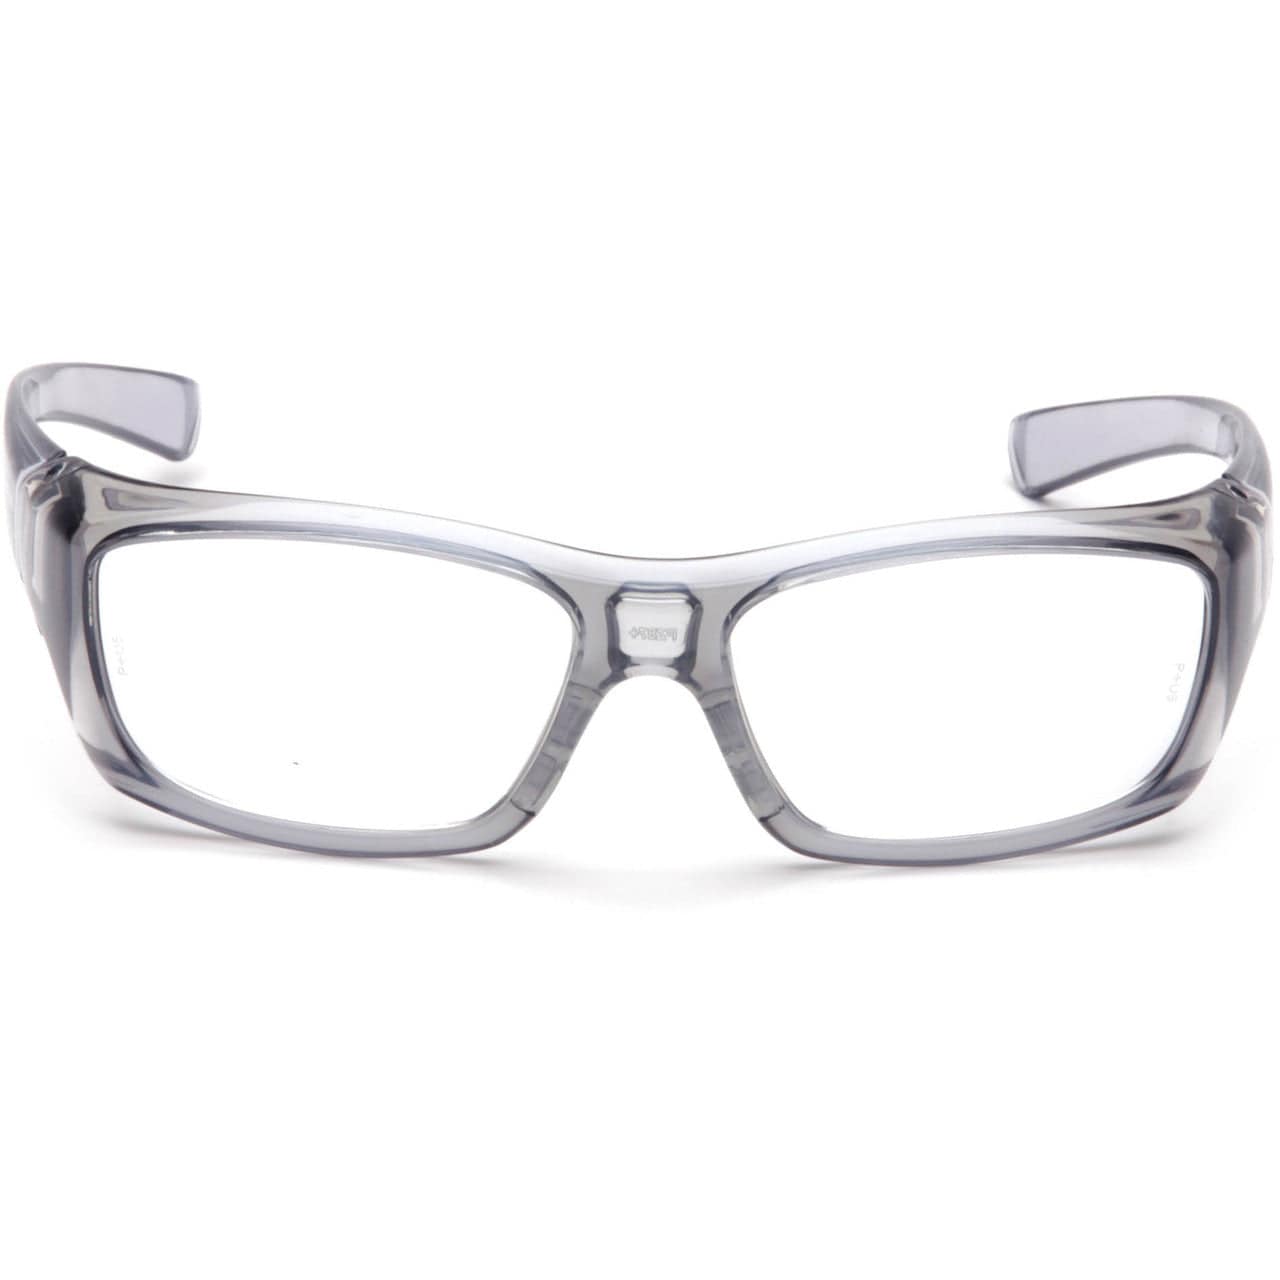 Pyramex Emerge Safety Glasses Translucent Gray Frame Clear Full Magnifying Lens Front